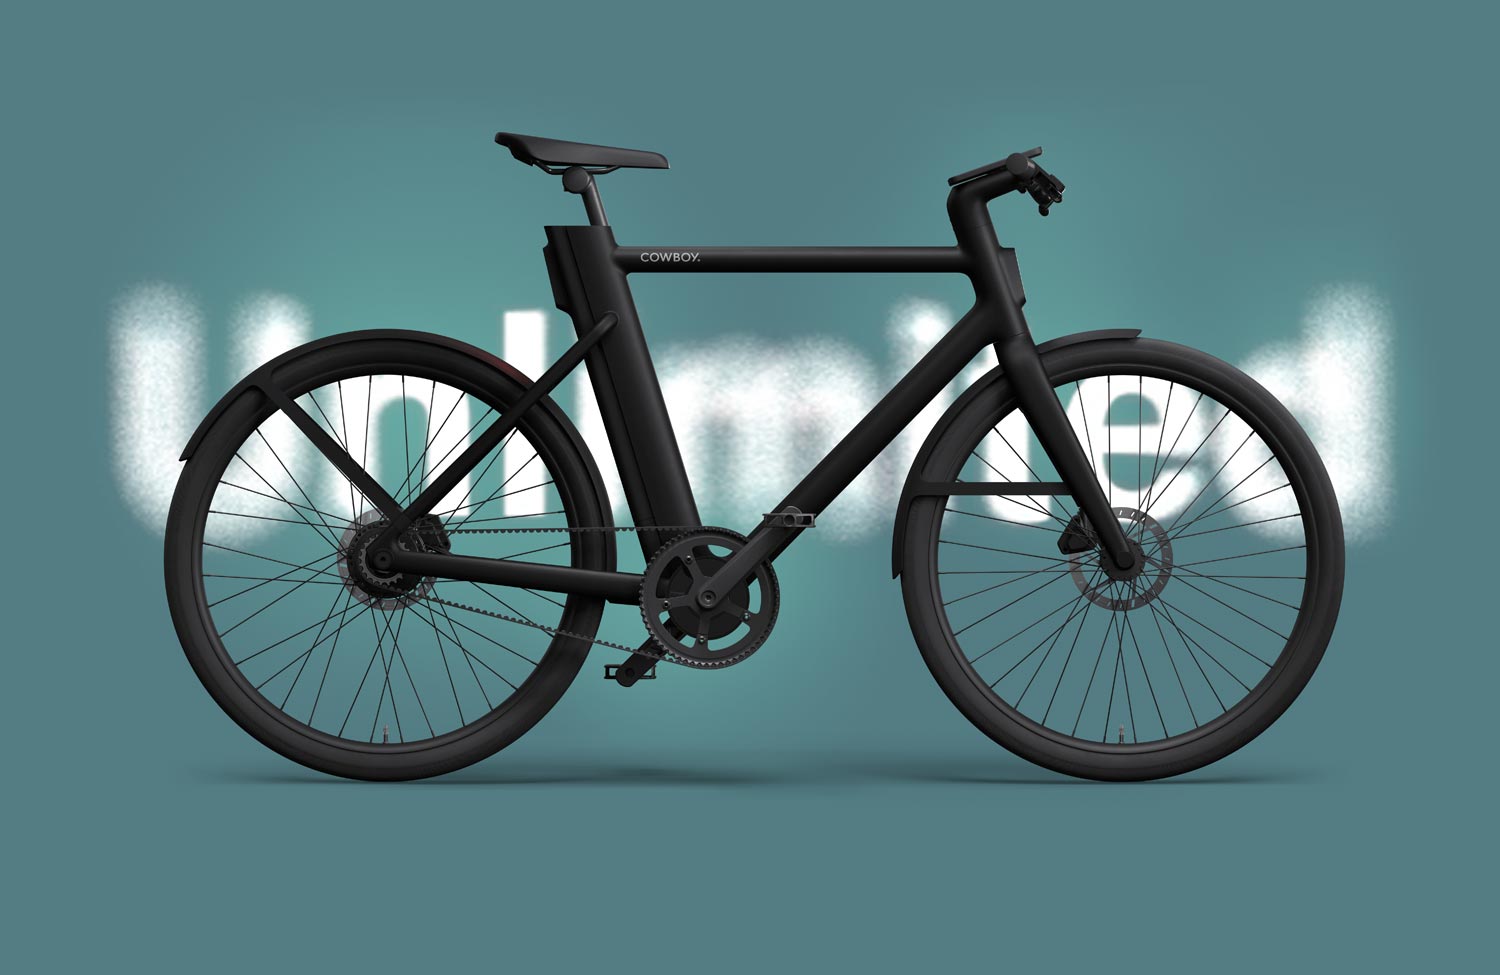 Cowboy C4 Unlimited: new version of the smart bike features automatic stepless shifting